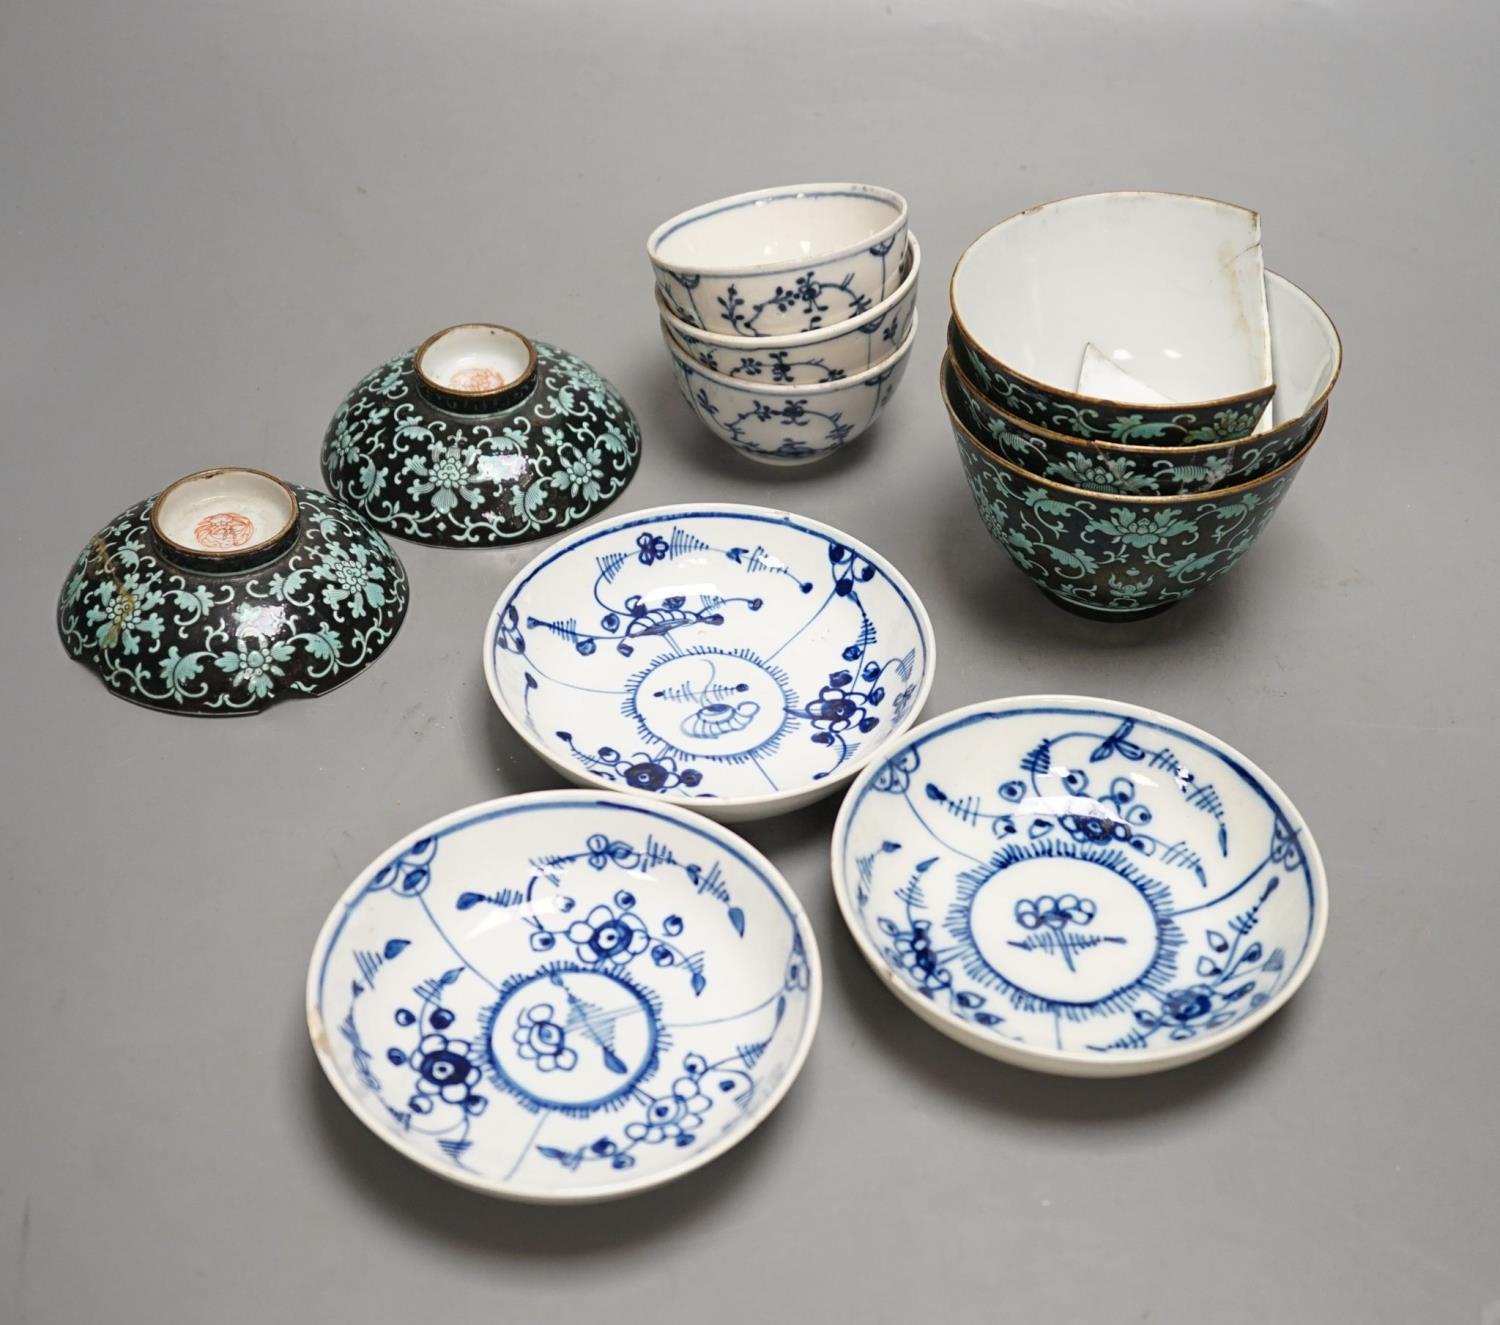 A 19th century Chinese black ground porcelain bowls and two covers, together with an three onion